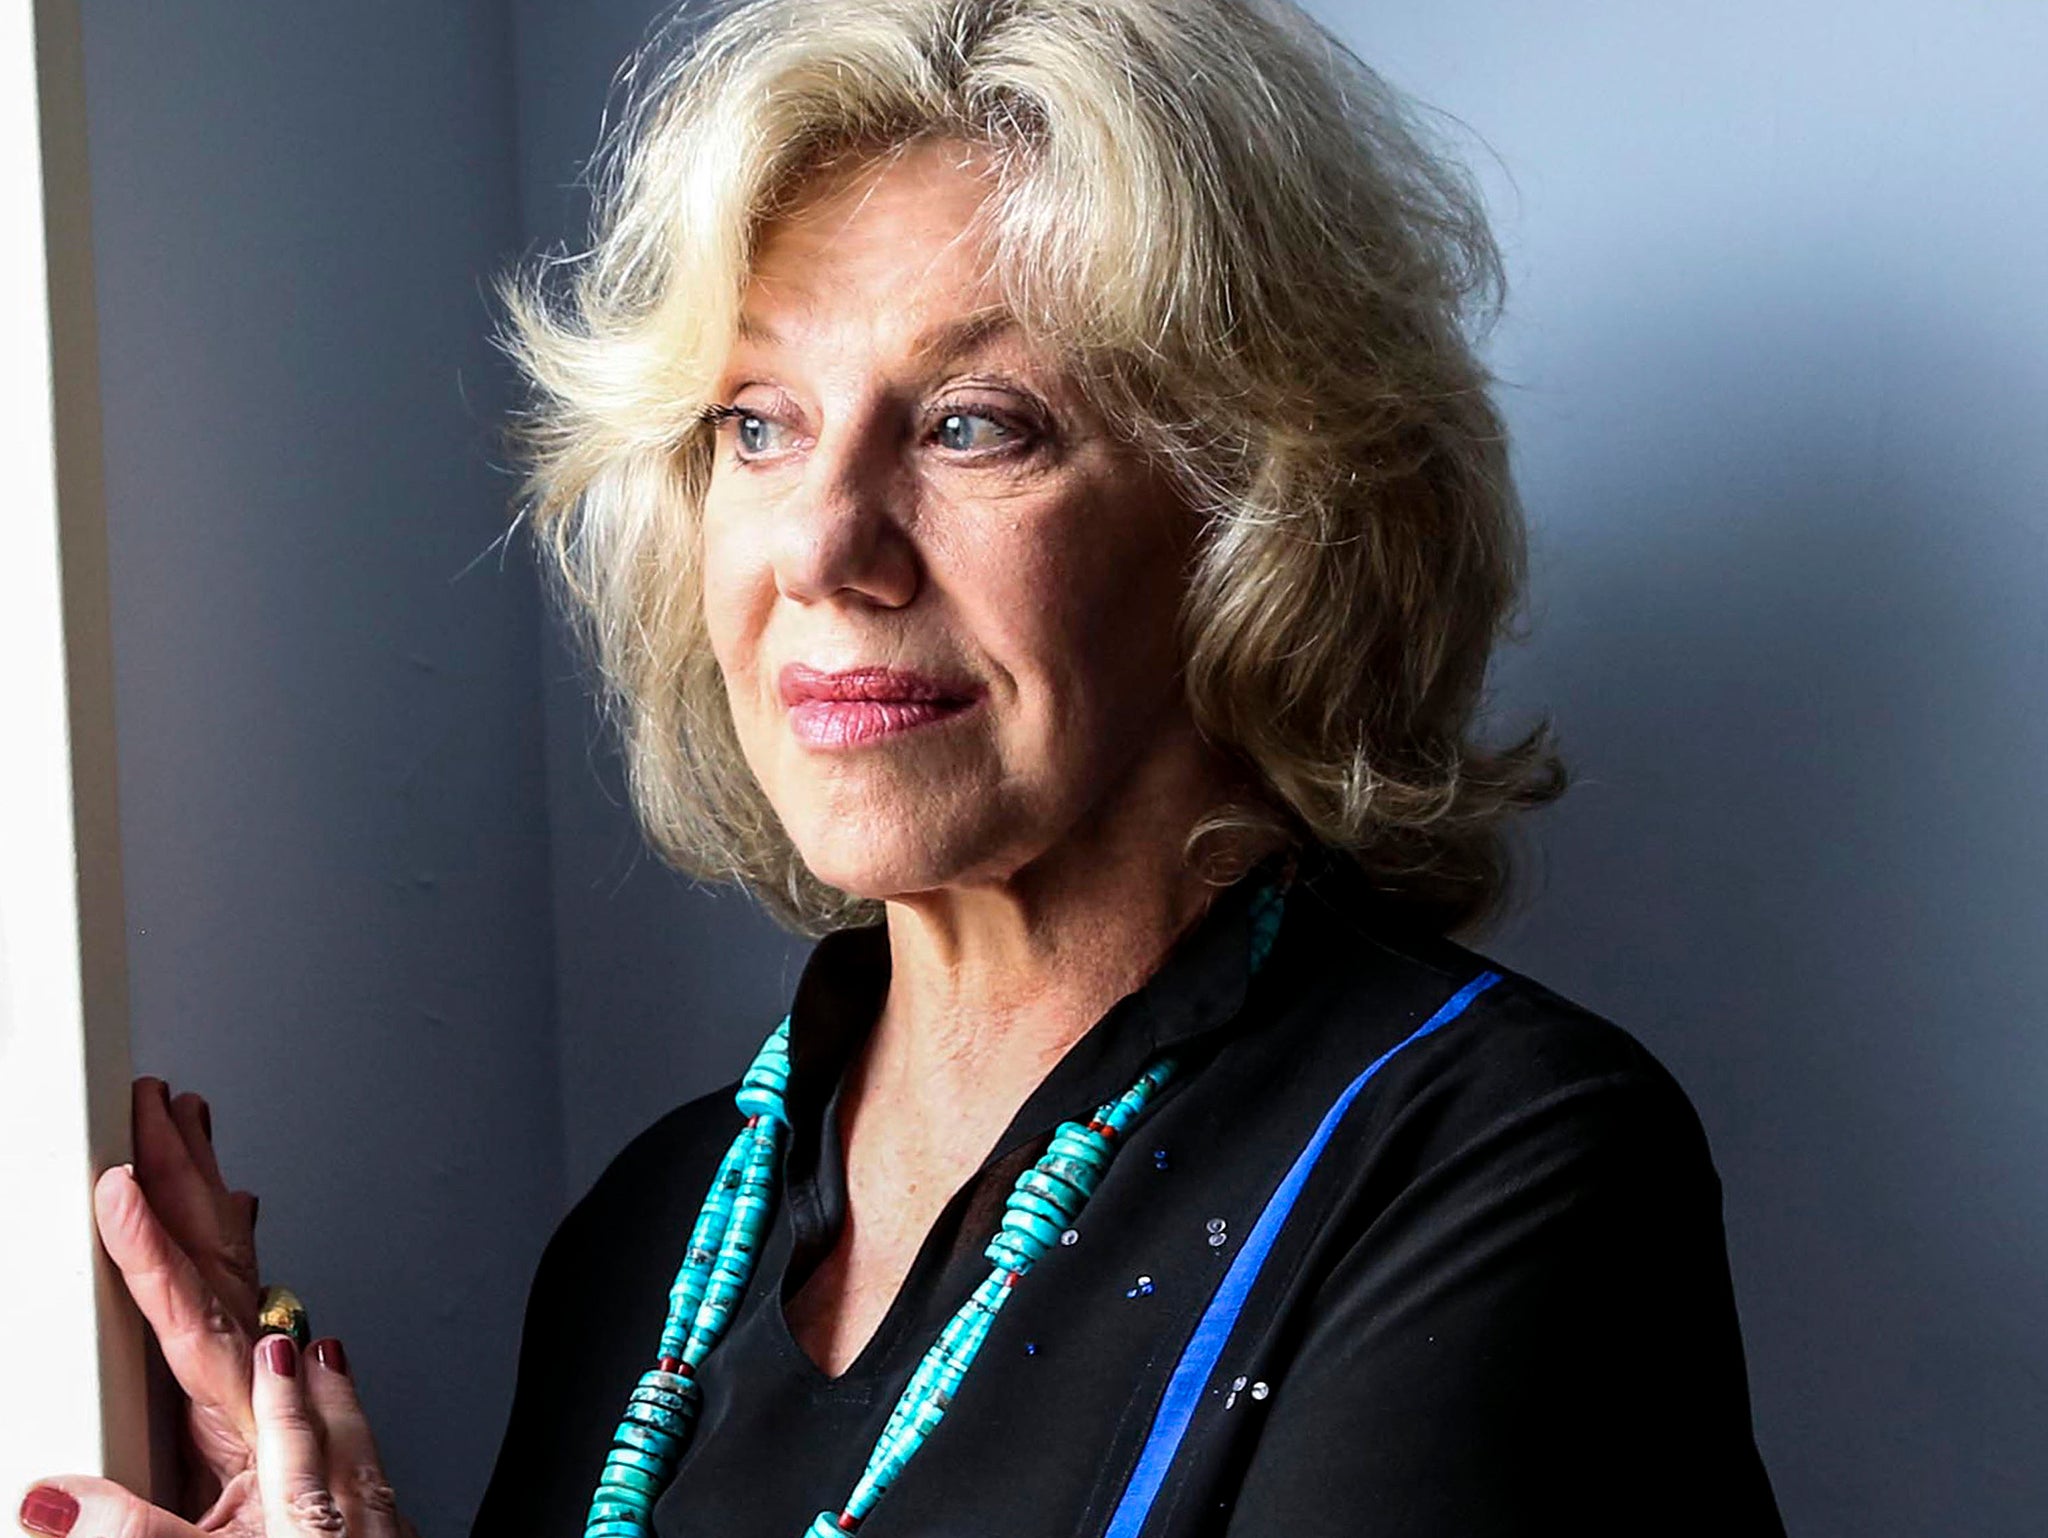 Fear Of Dying By Erica Jong Book Review Buckle Up For A Bumpy Flight The Independent The